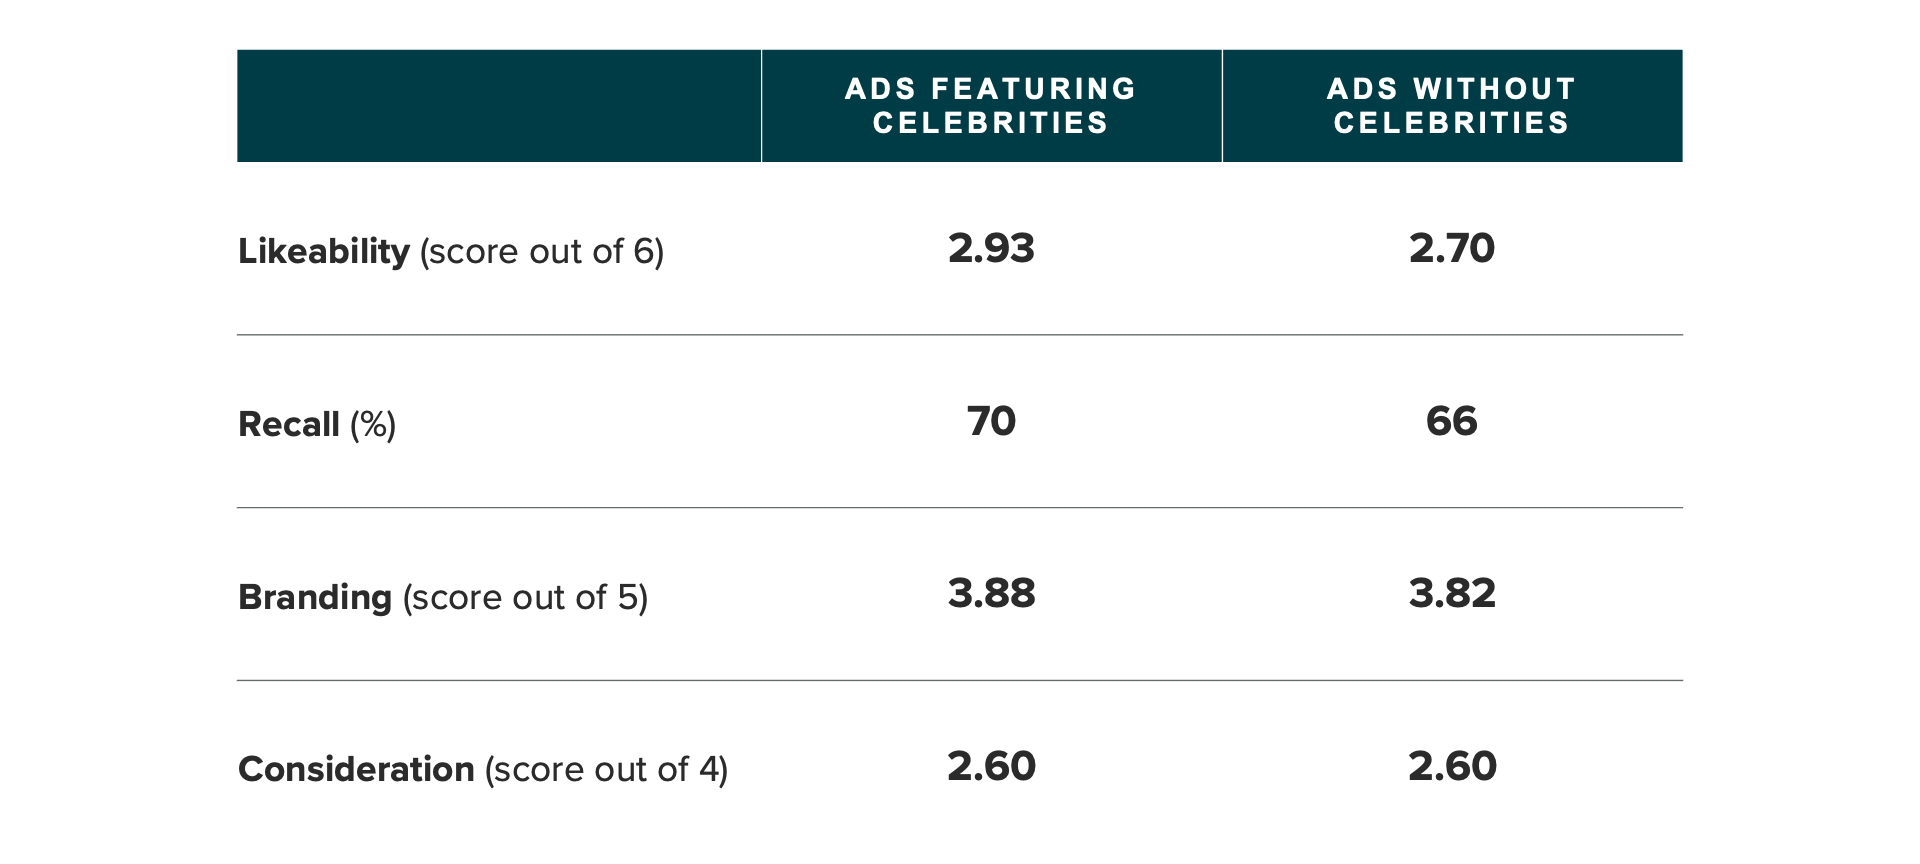 Table of campaign effectiveness of Super Bowl LVII ads featuring celebrities, showing celebrity cameos made ads slightly more effective.